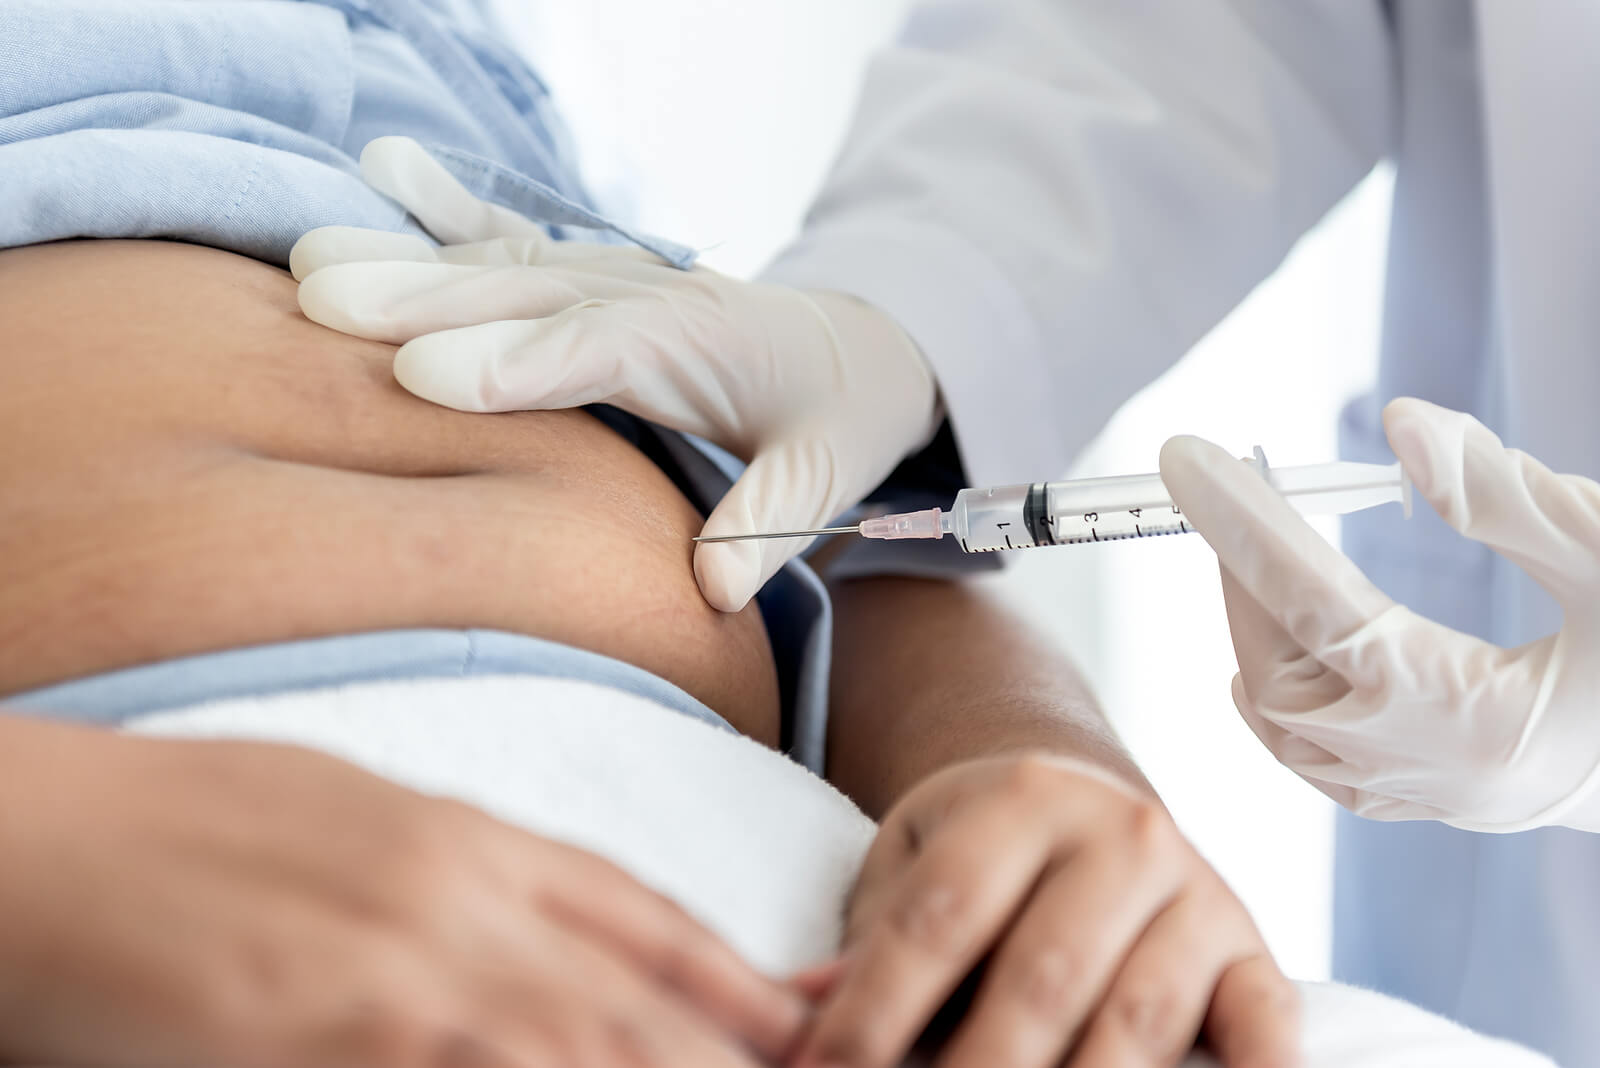 A diabetic patient receiving an insulin shot in the stomach.